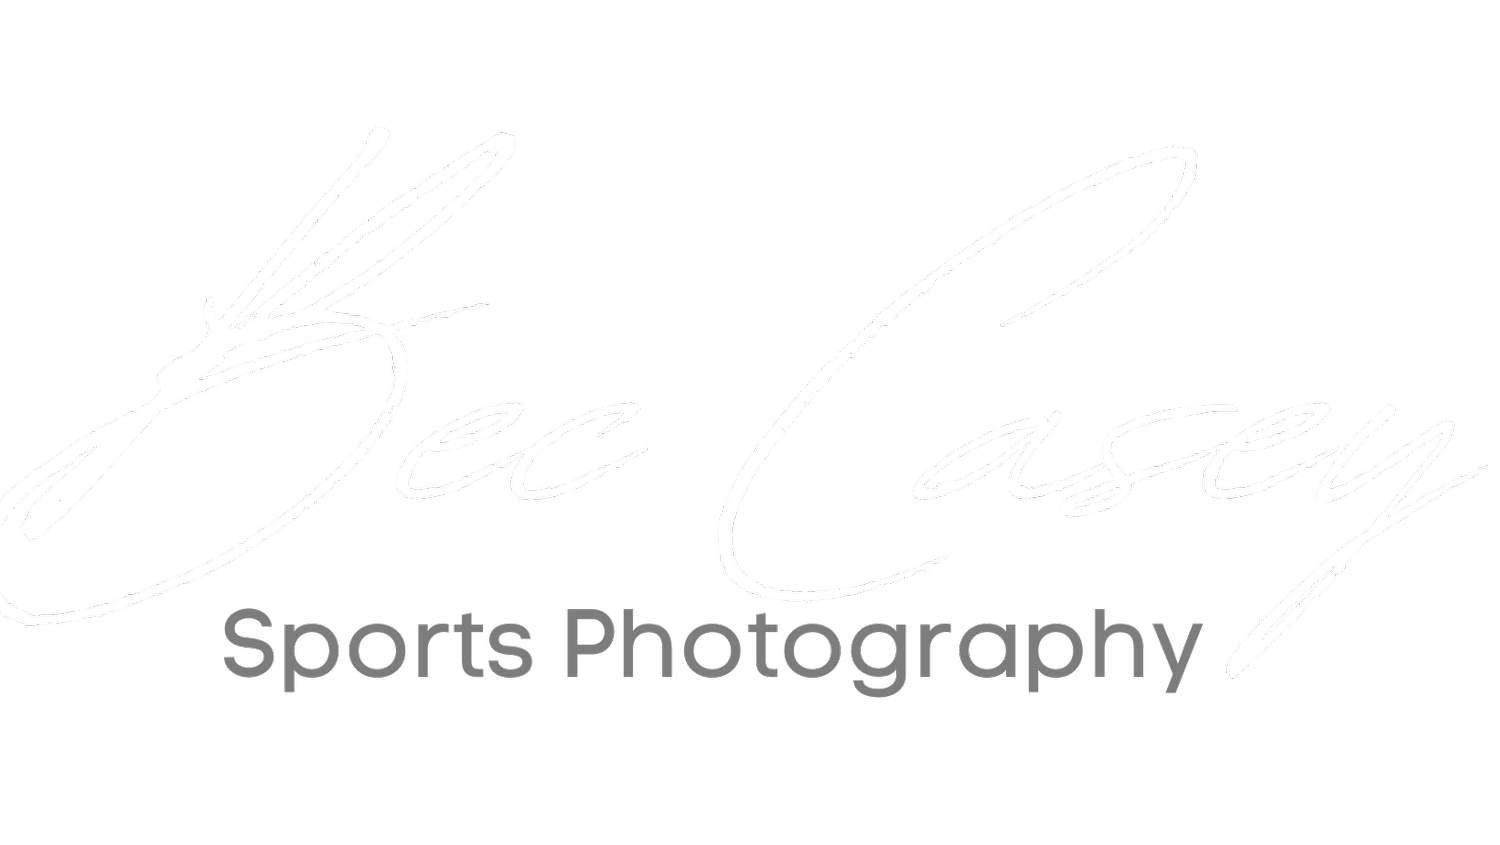 Bec Casey Sports Photograpthy